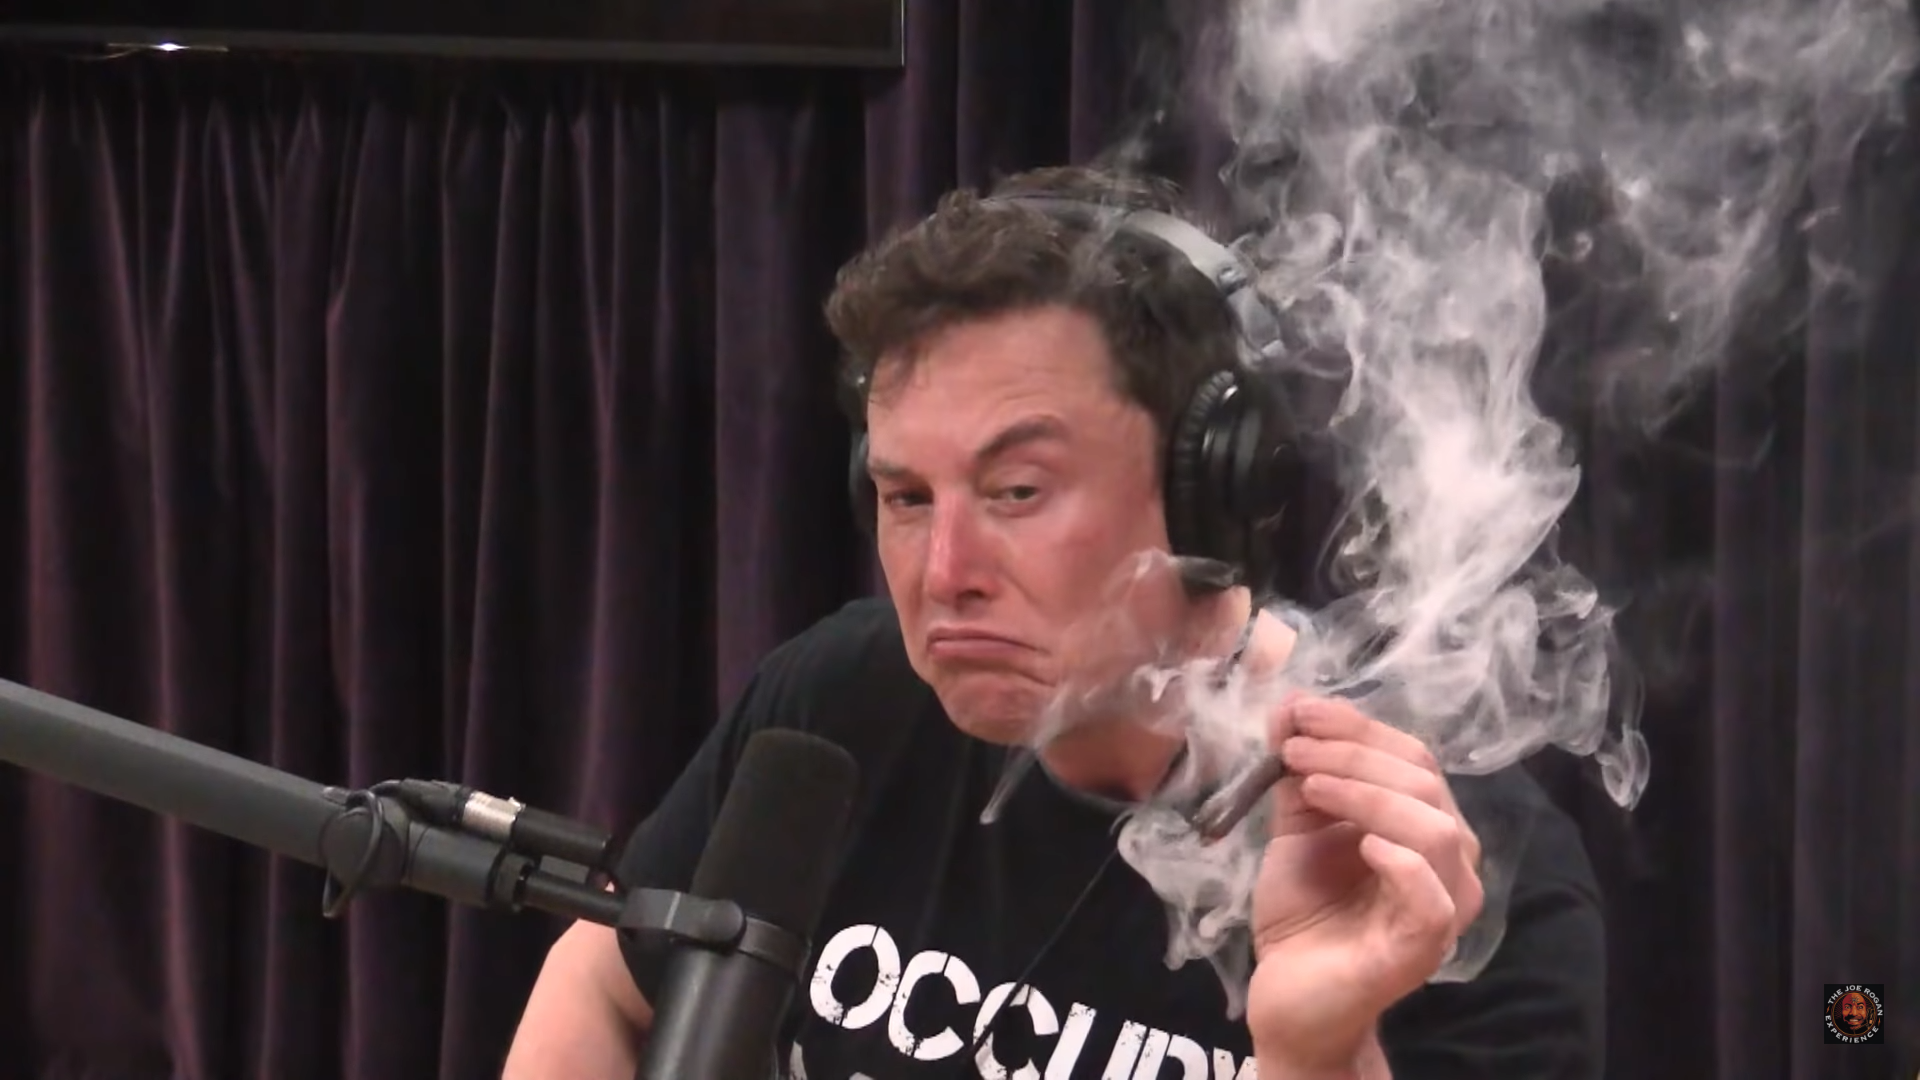 Weed-Themed Porn Studio Offers Elon Musk $150,000 to Appear in Smut Film